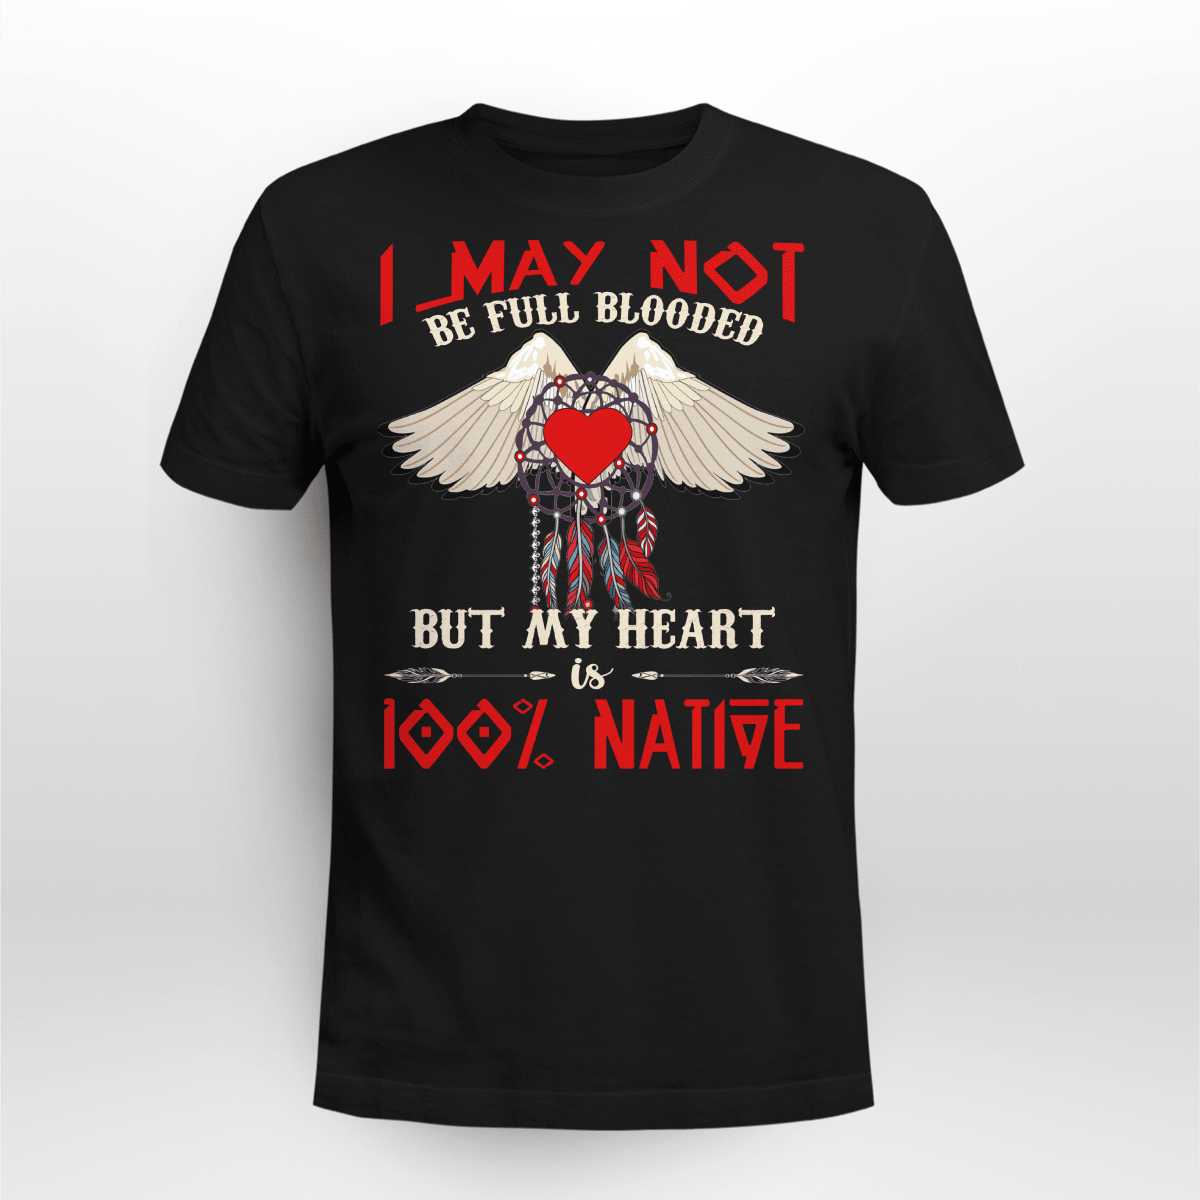 But My Heart Fully Native